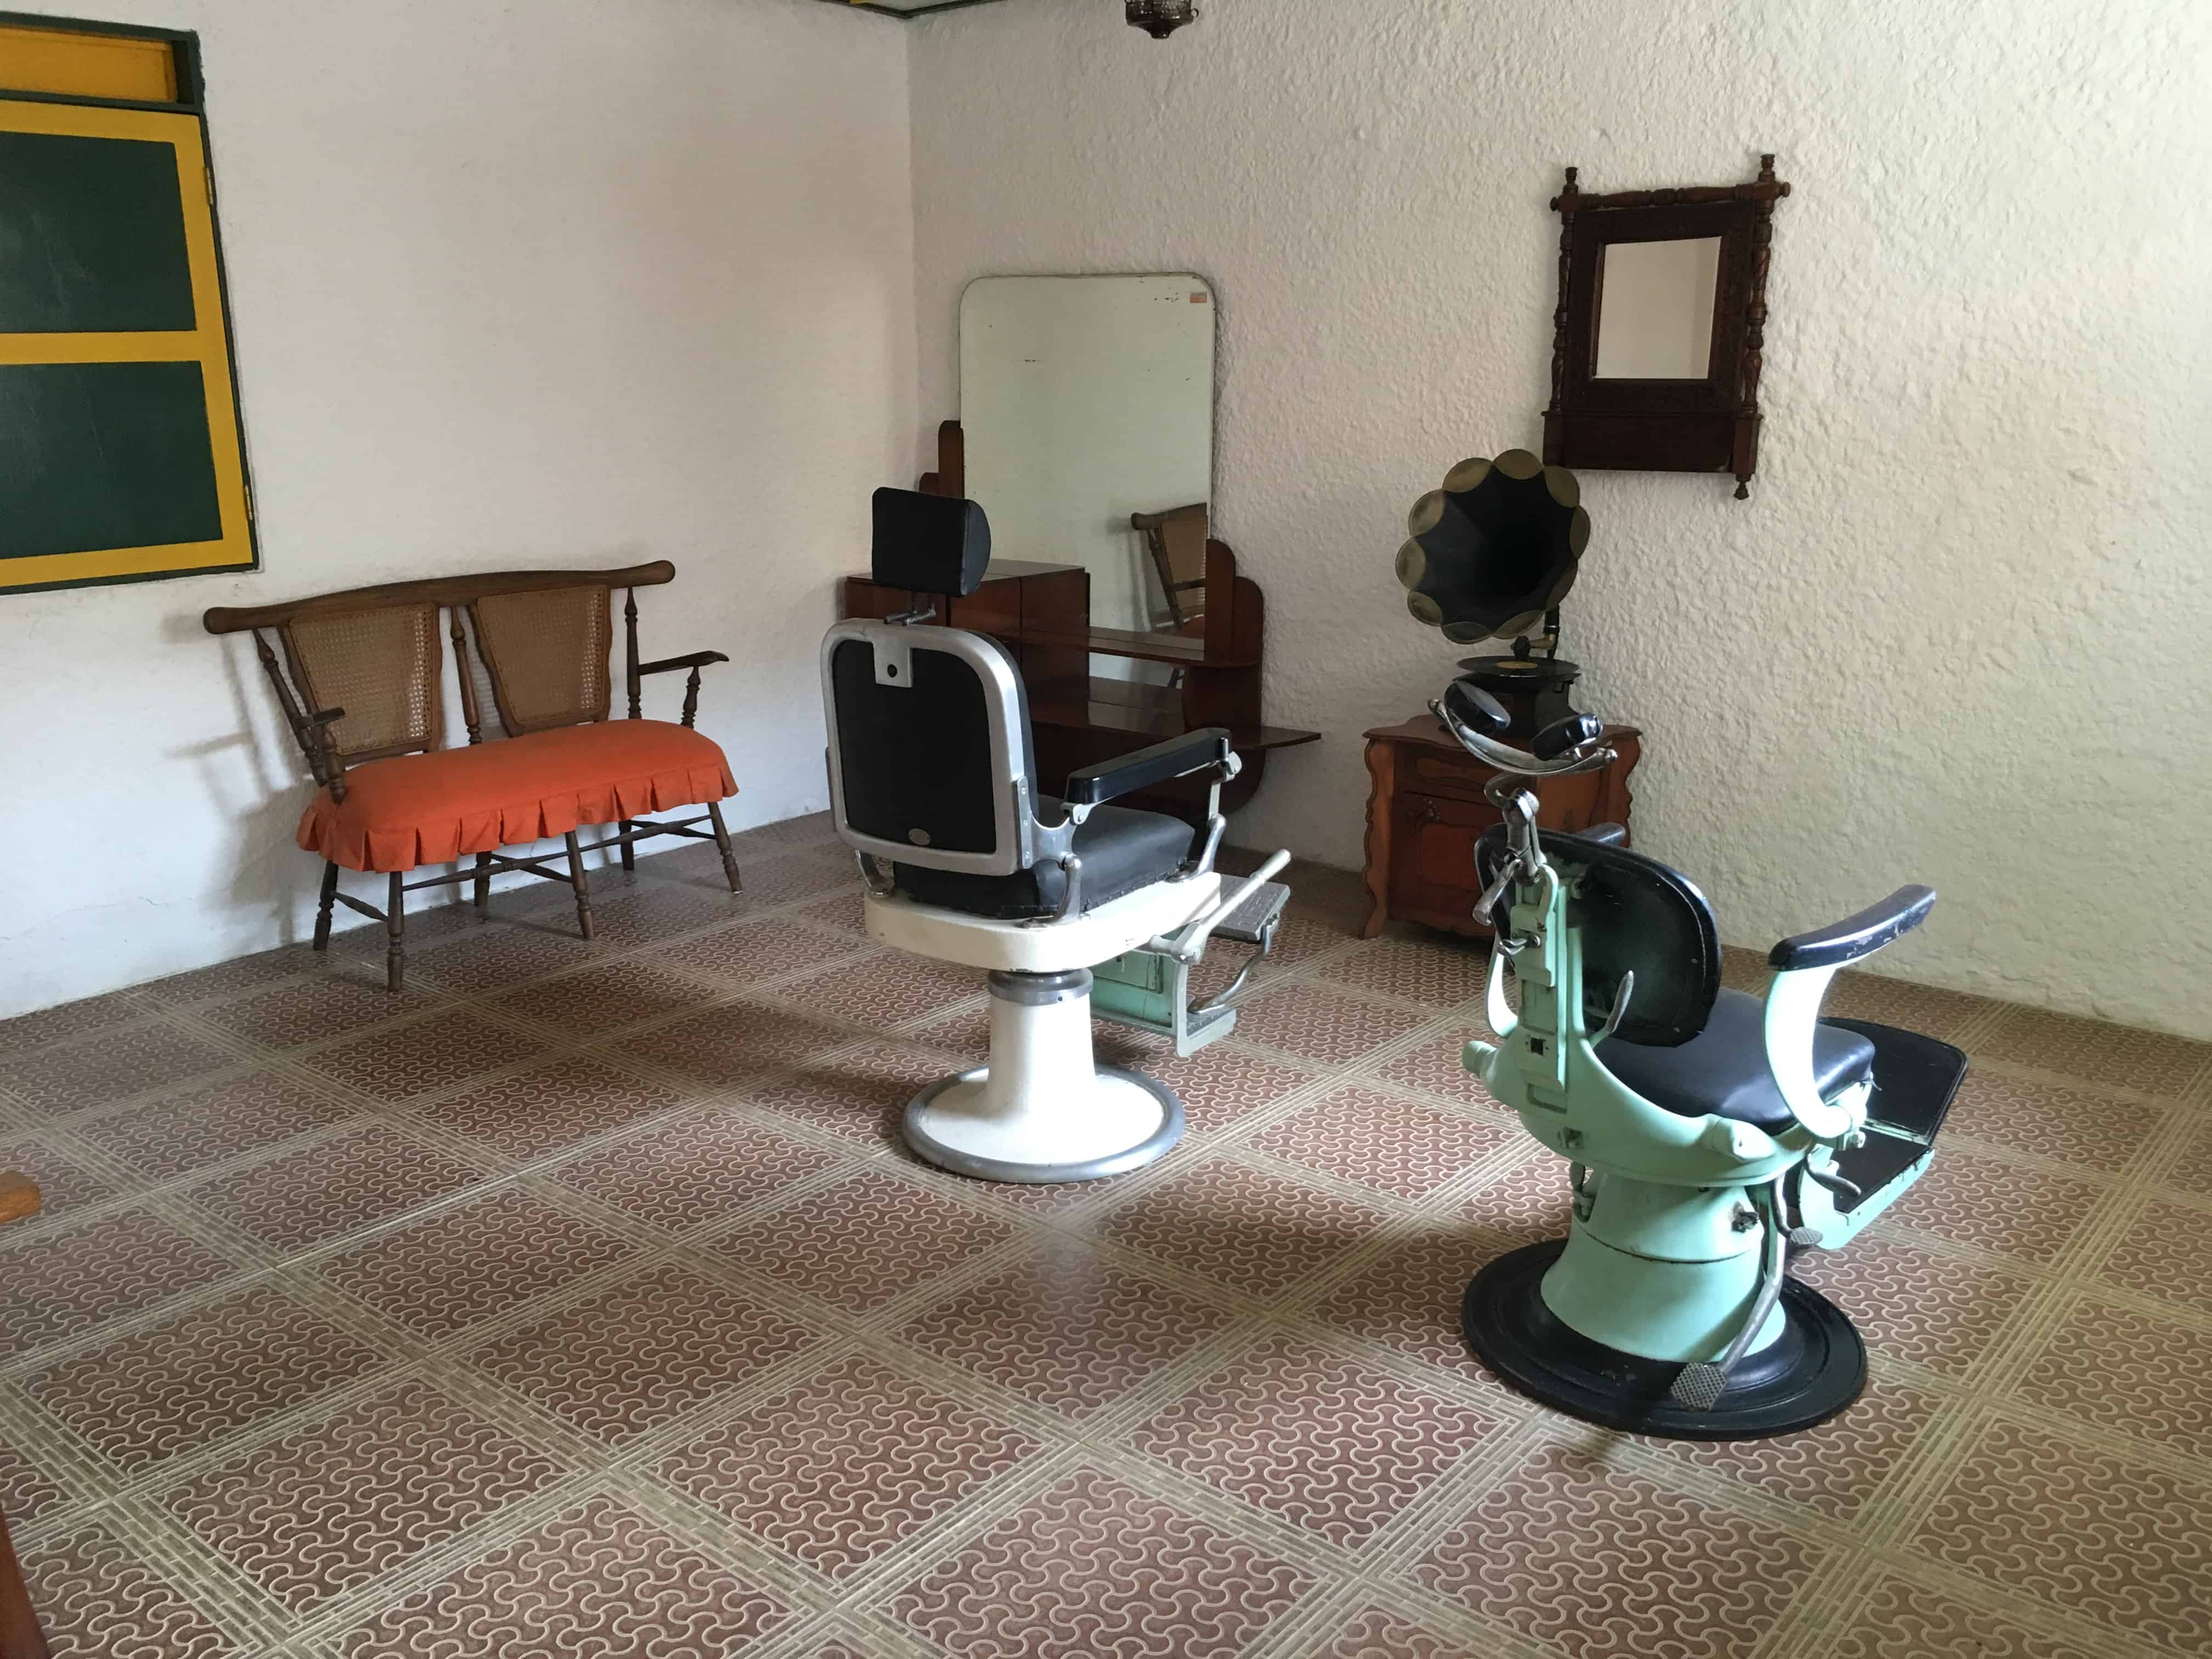 Barber shop at Old Pereira at Parque Consotá in Galicia, Risaralda, Colombia